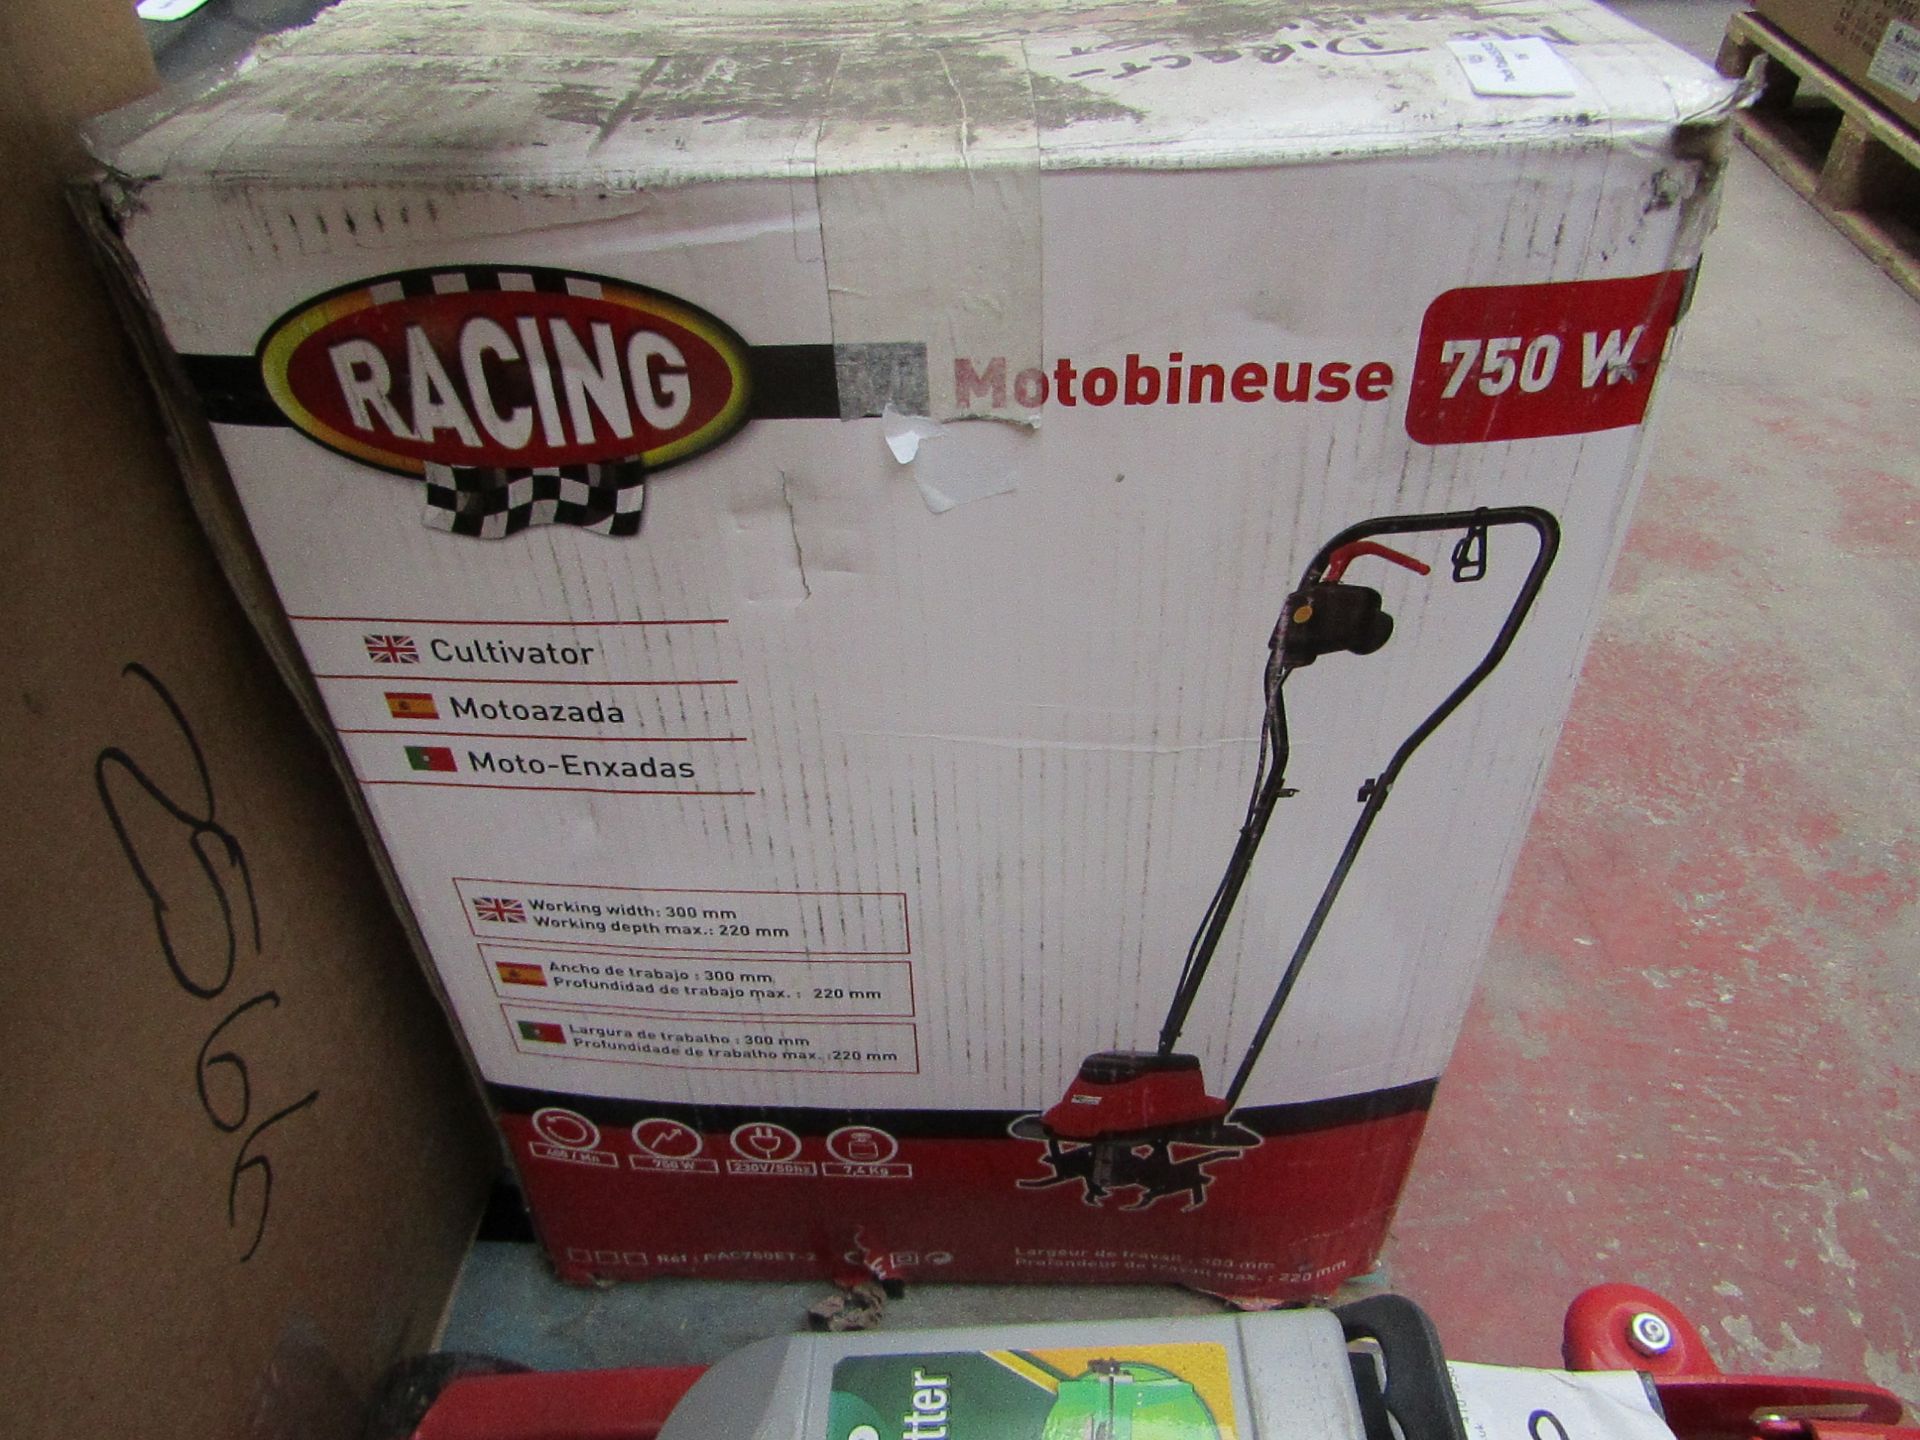 1x Racing 750w rotovator - Used Condition - Unchecked and Untested this item is a return and the